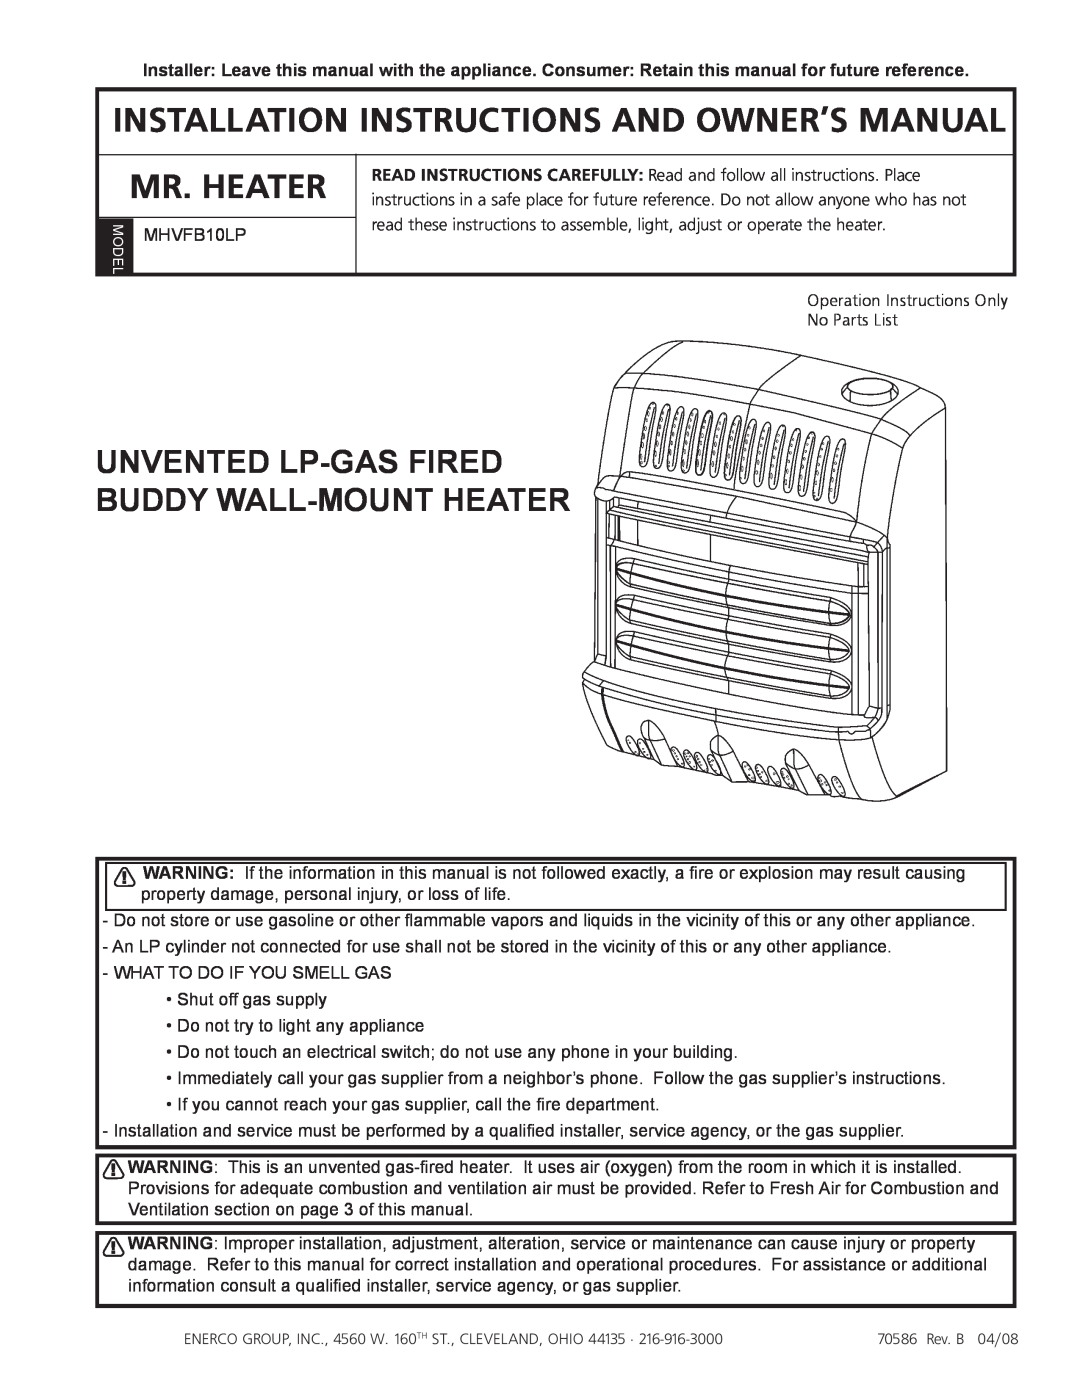 Mr. Heater MHVFB10LP installation instructions Mr. Heater, Unvented Lp-Gasfired Buddy Wall-Mountheater 